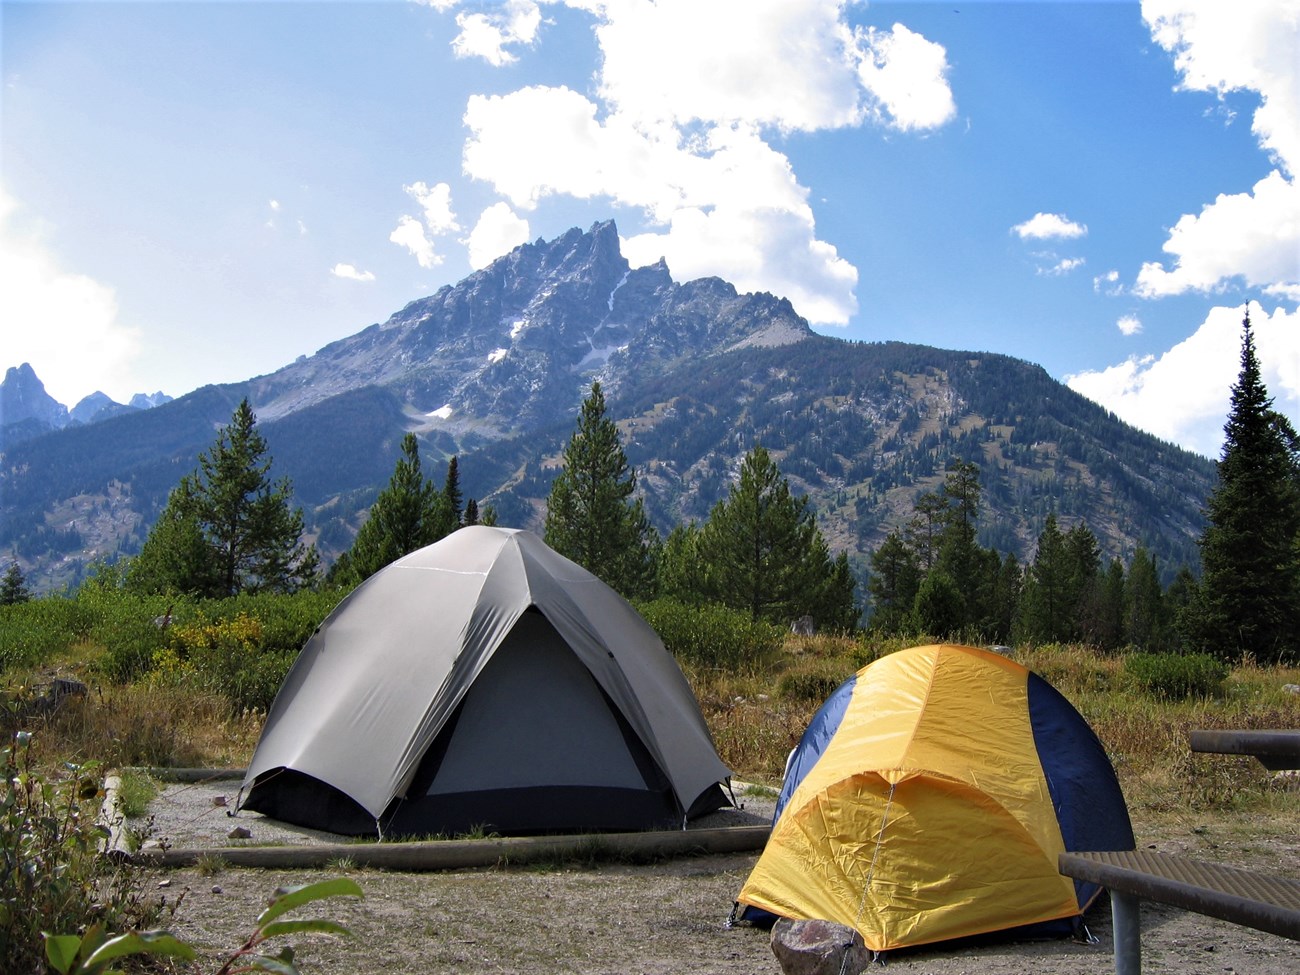 Two tents in a campground in front of a mountain.